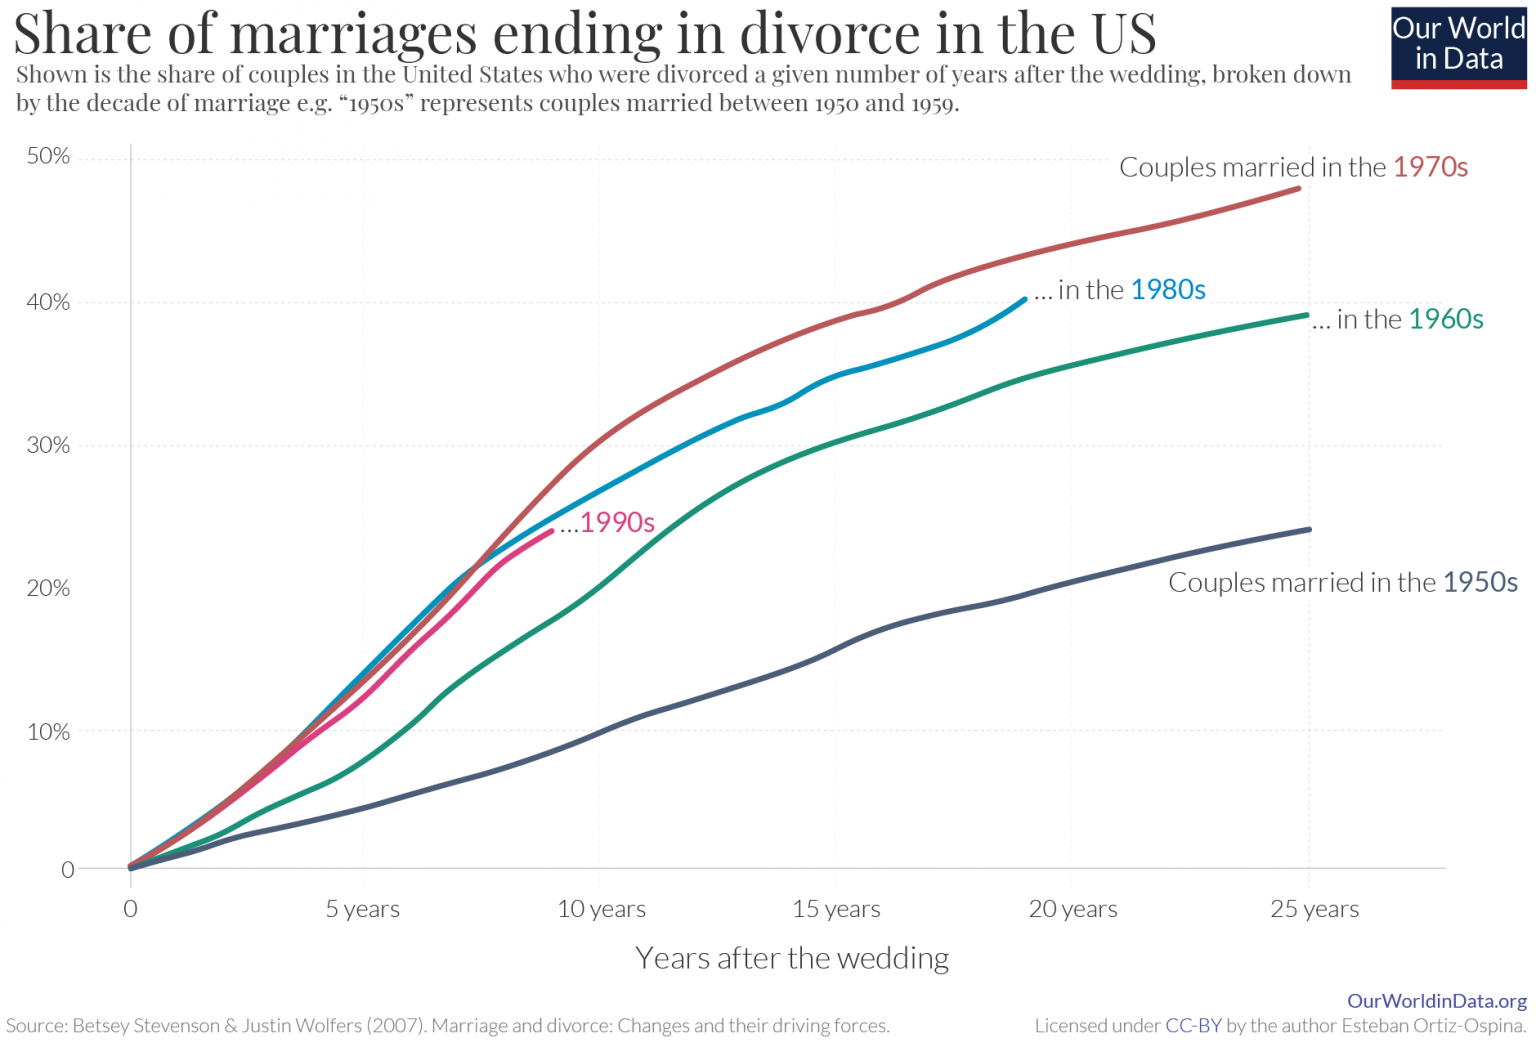 Share of marriages ending in divorce in the US, by year of marriage16.